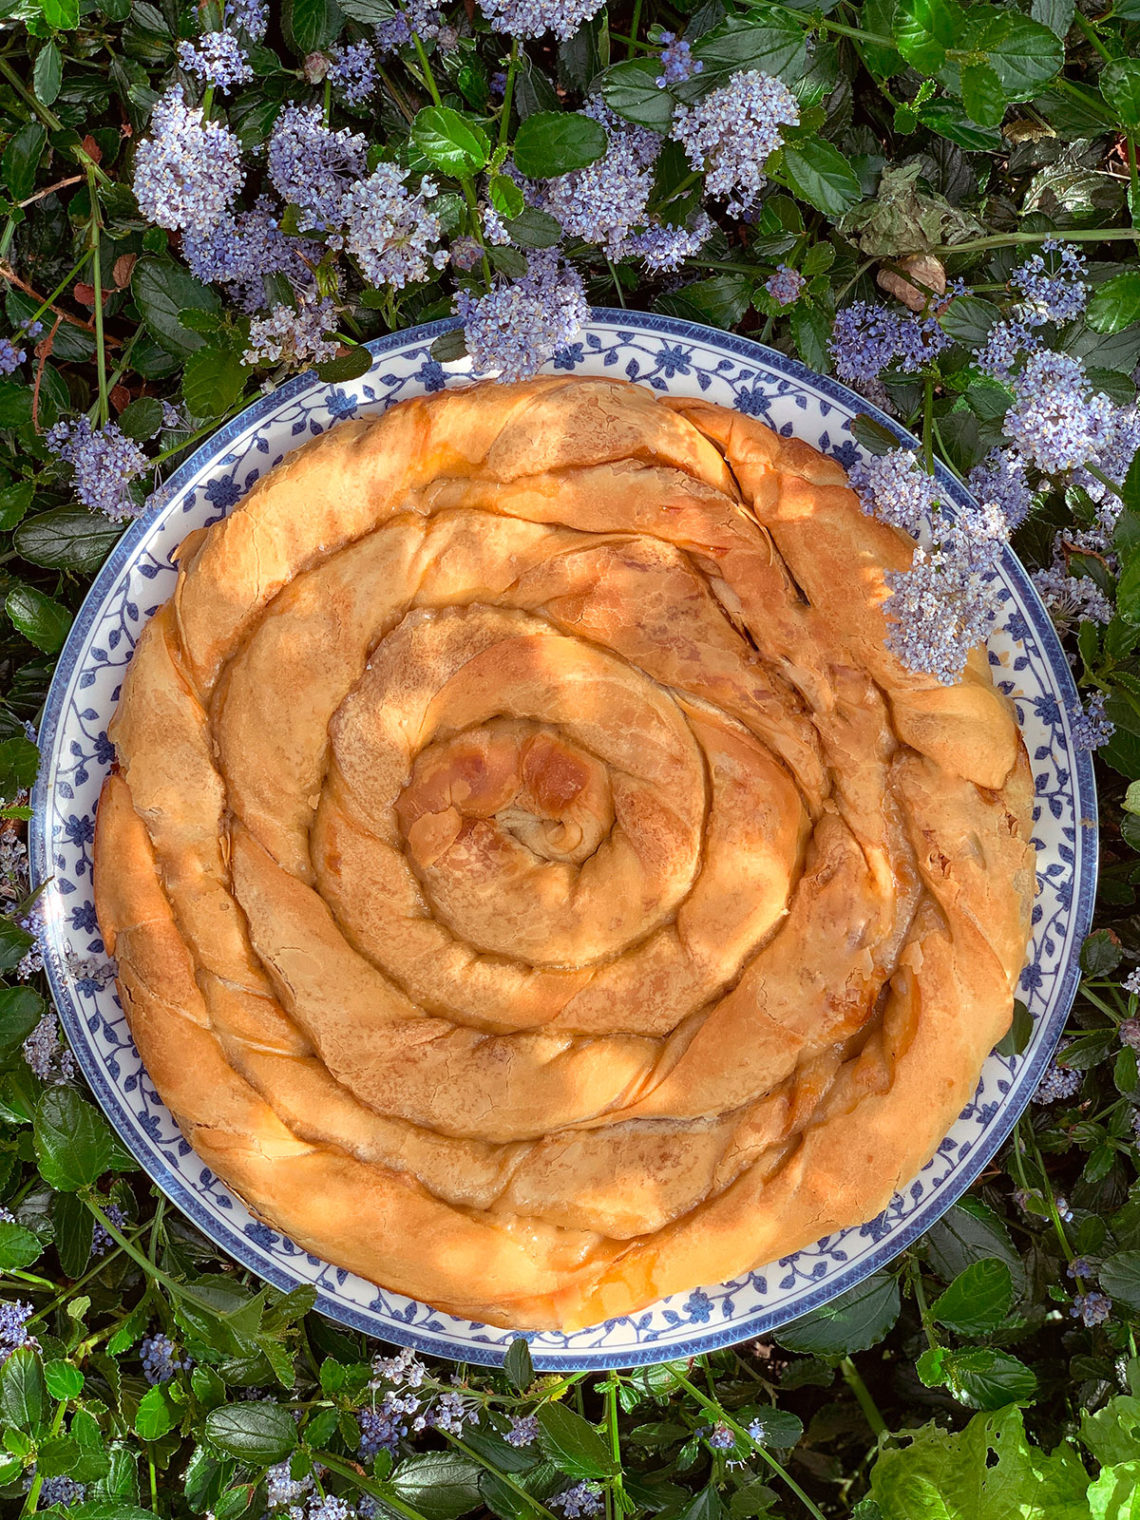 Apple vertuta pastry. Delicious recipes from famous chefs.